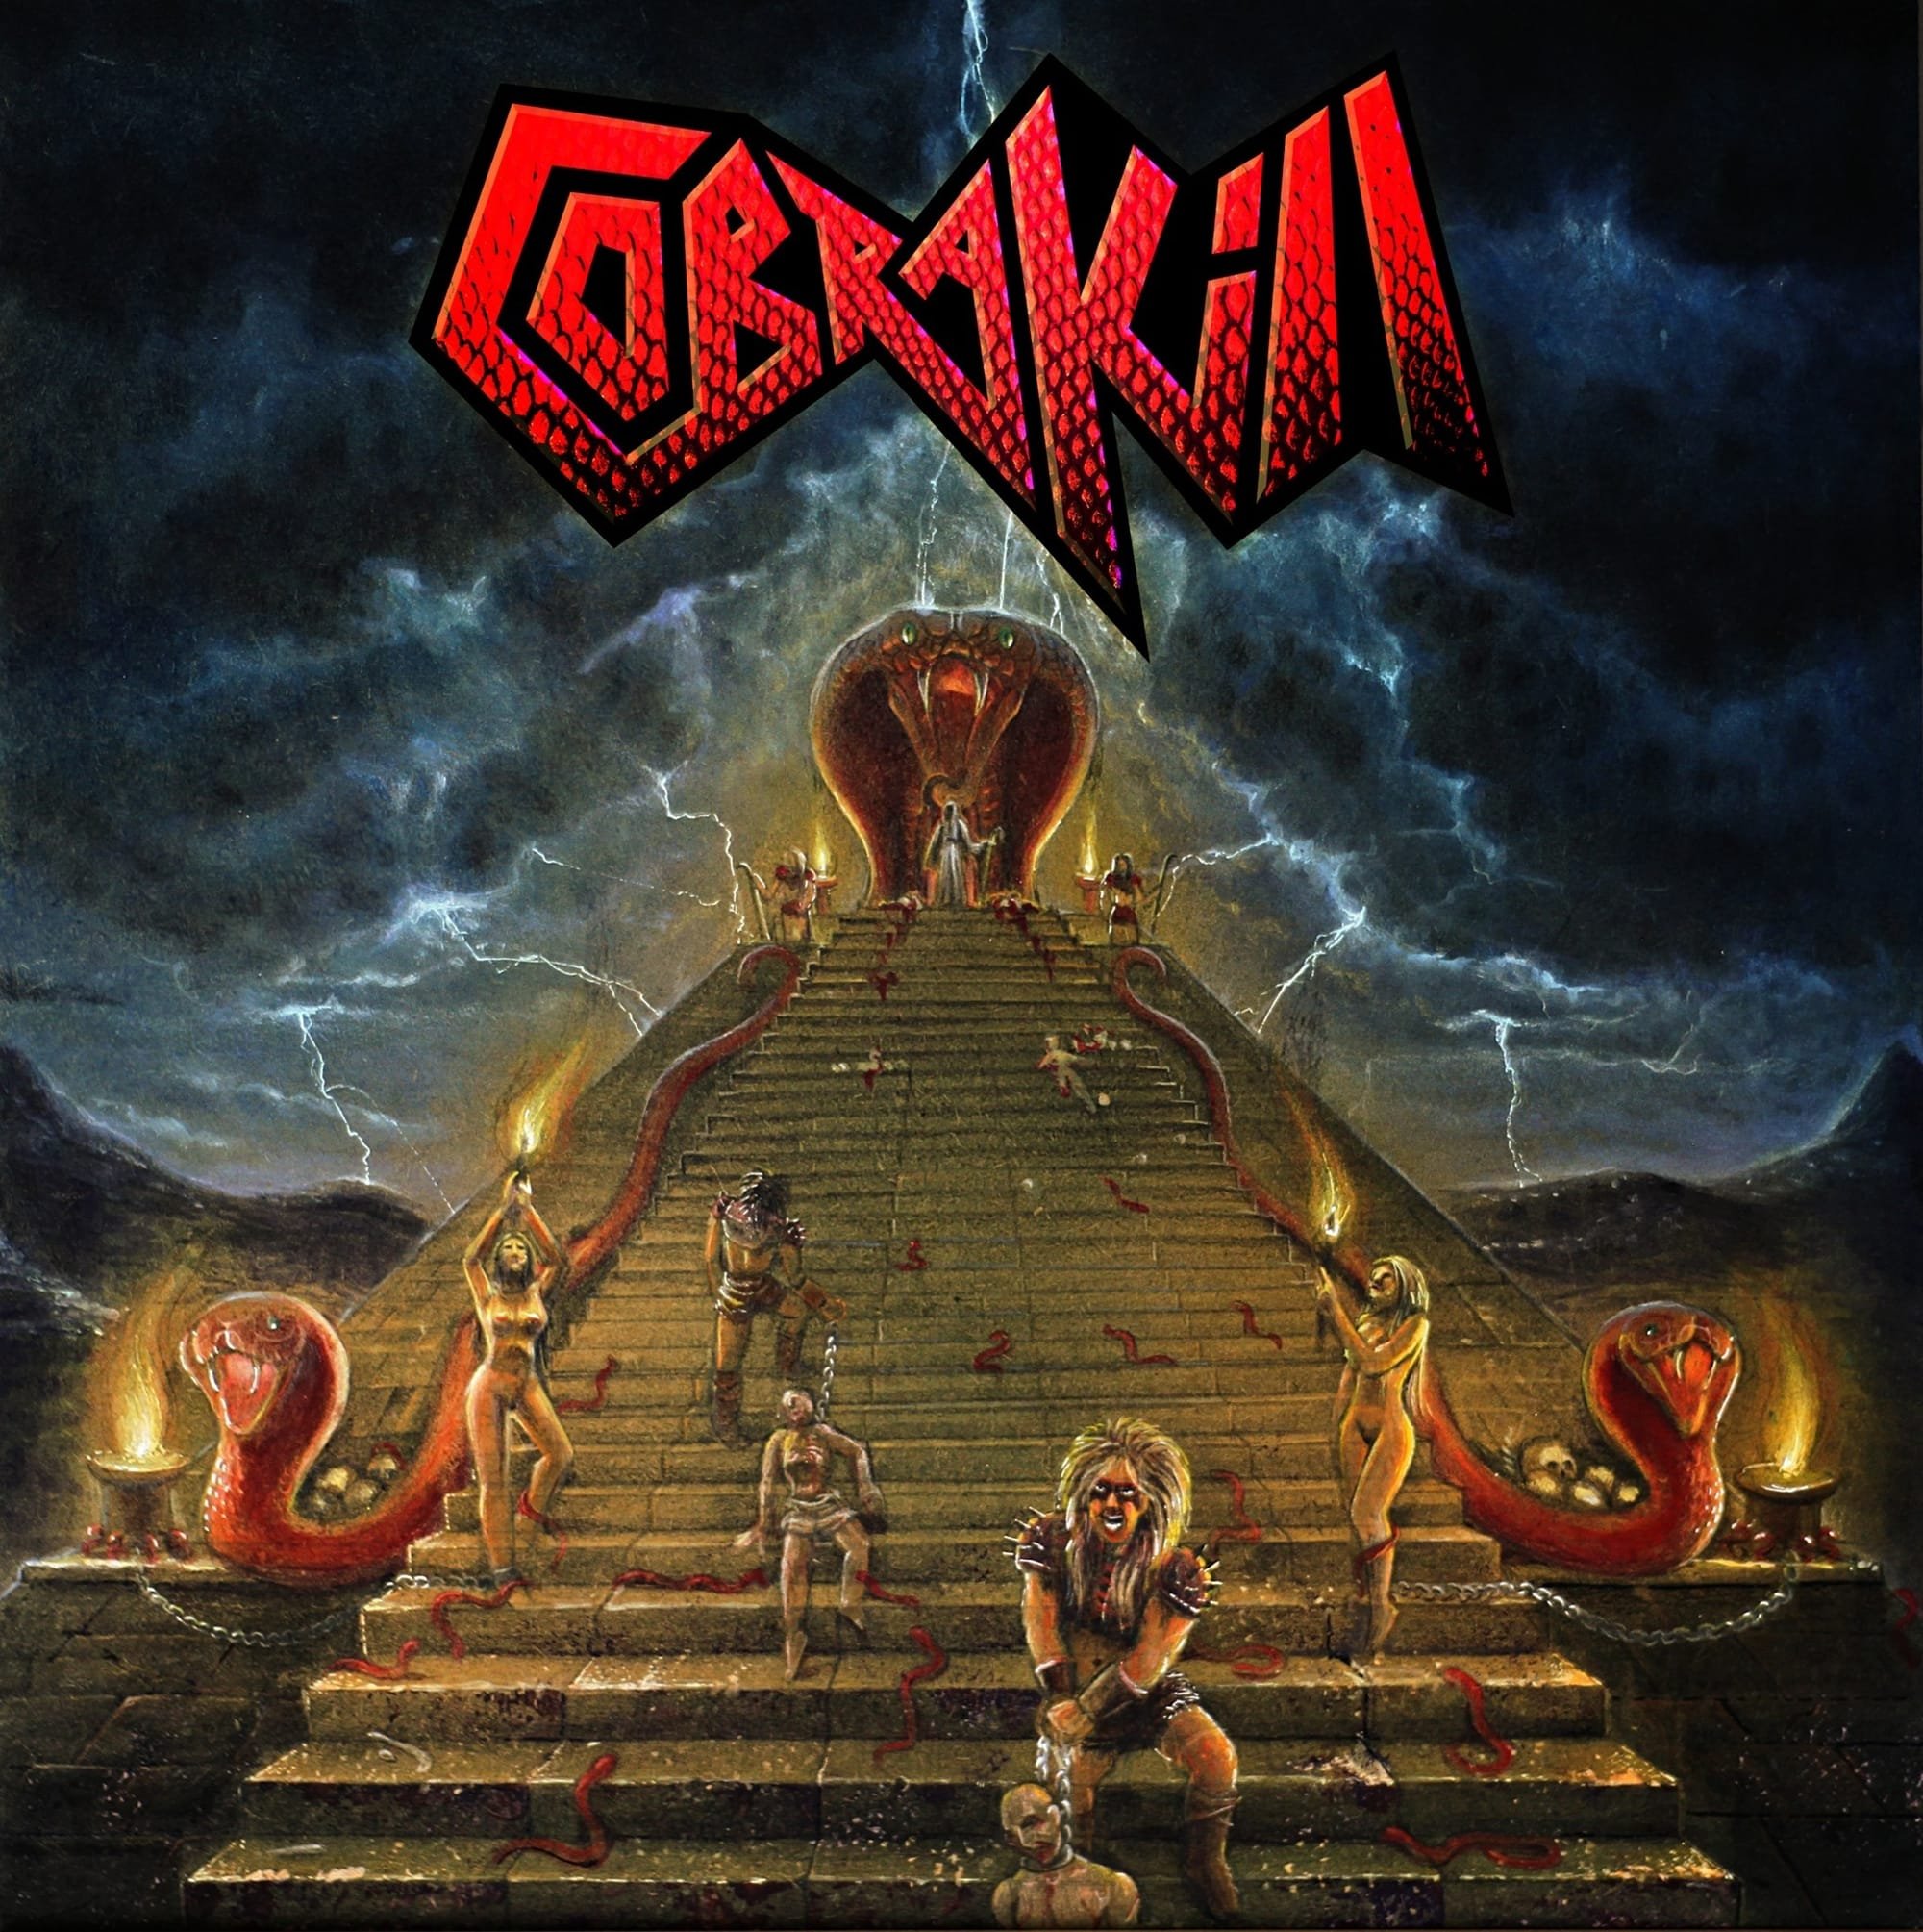 Interview with COBRAKILL